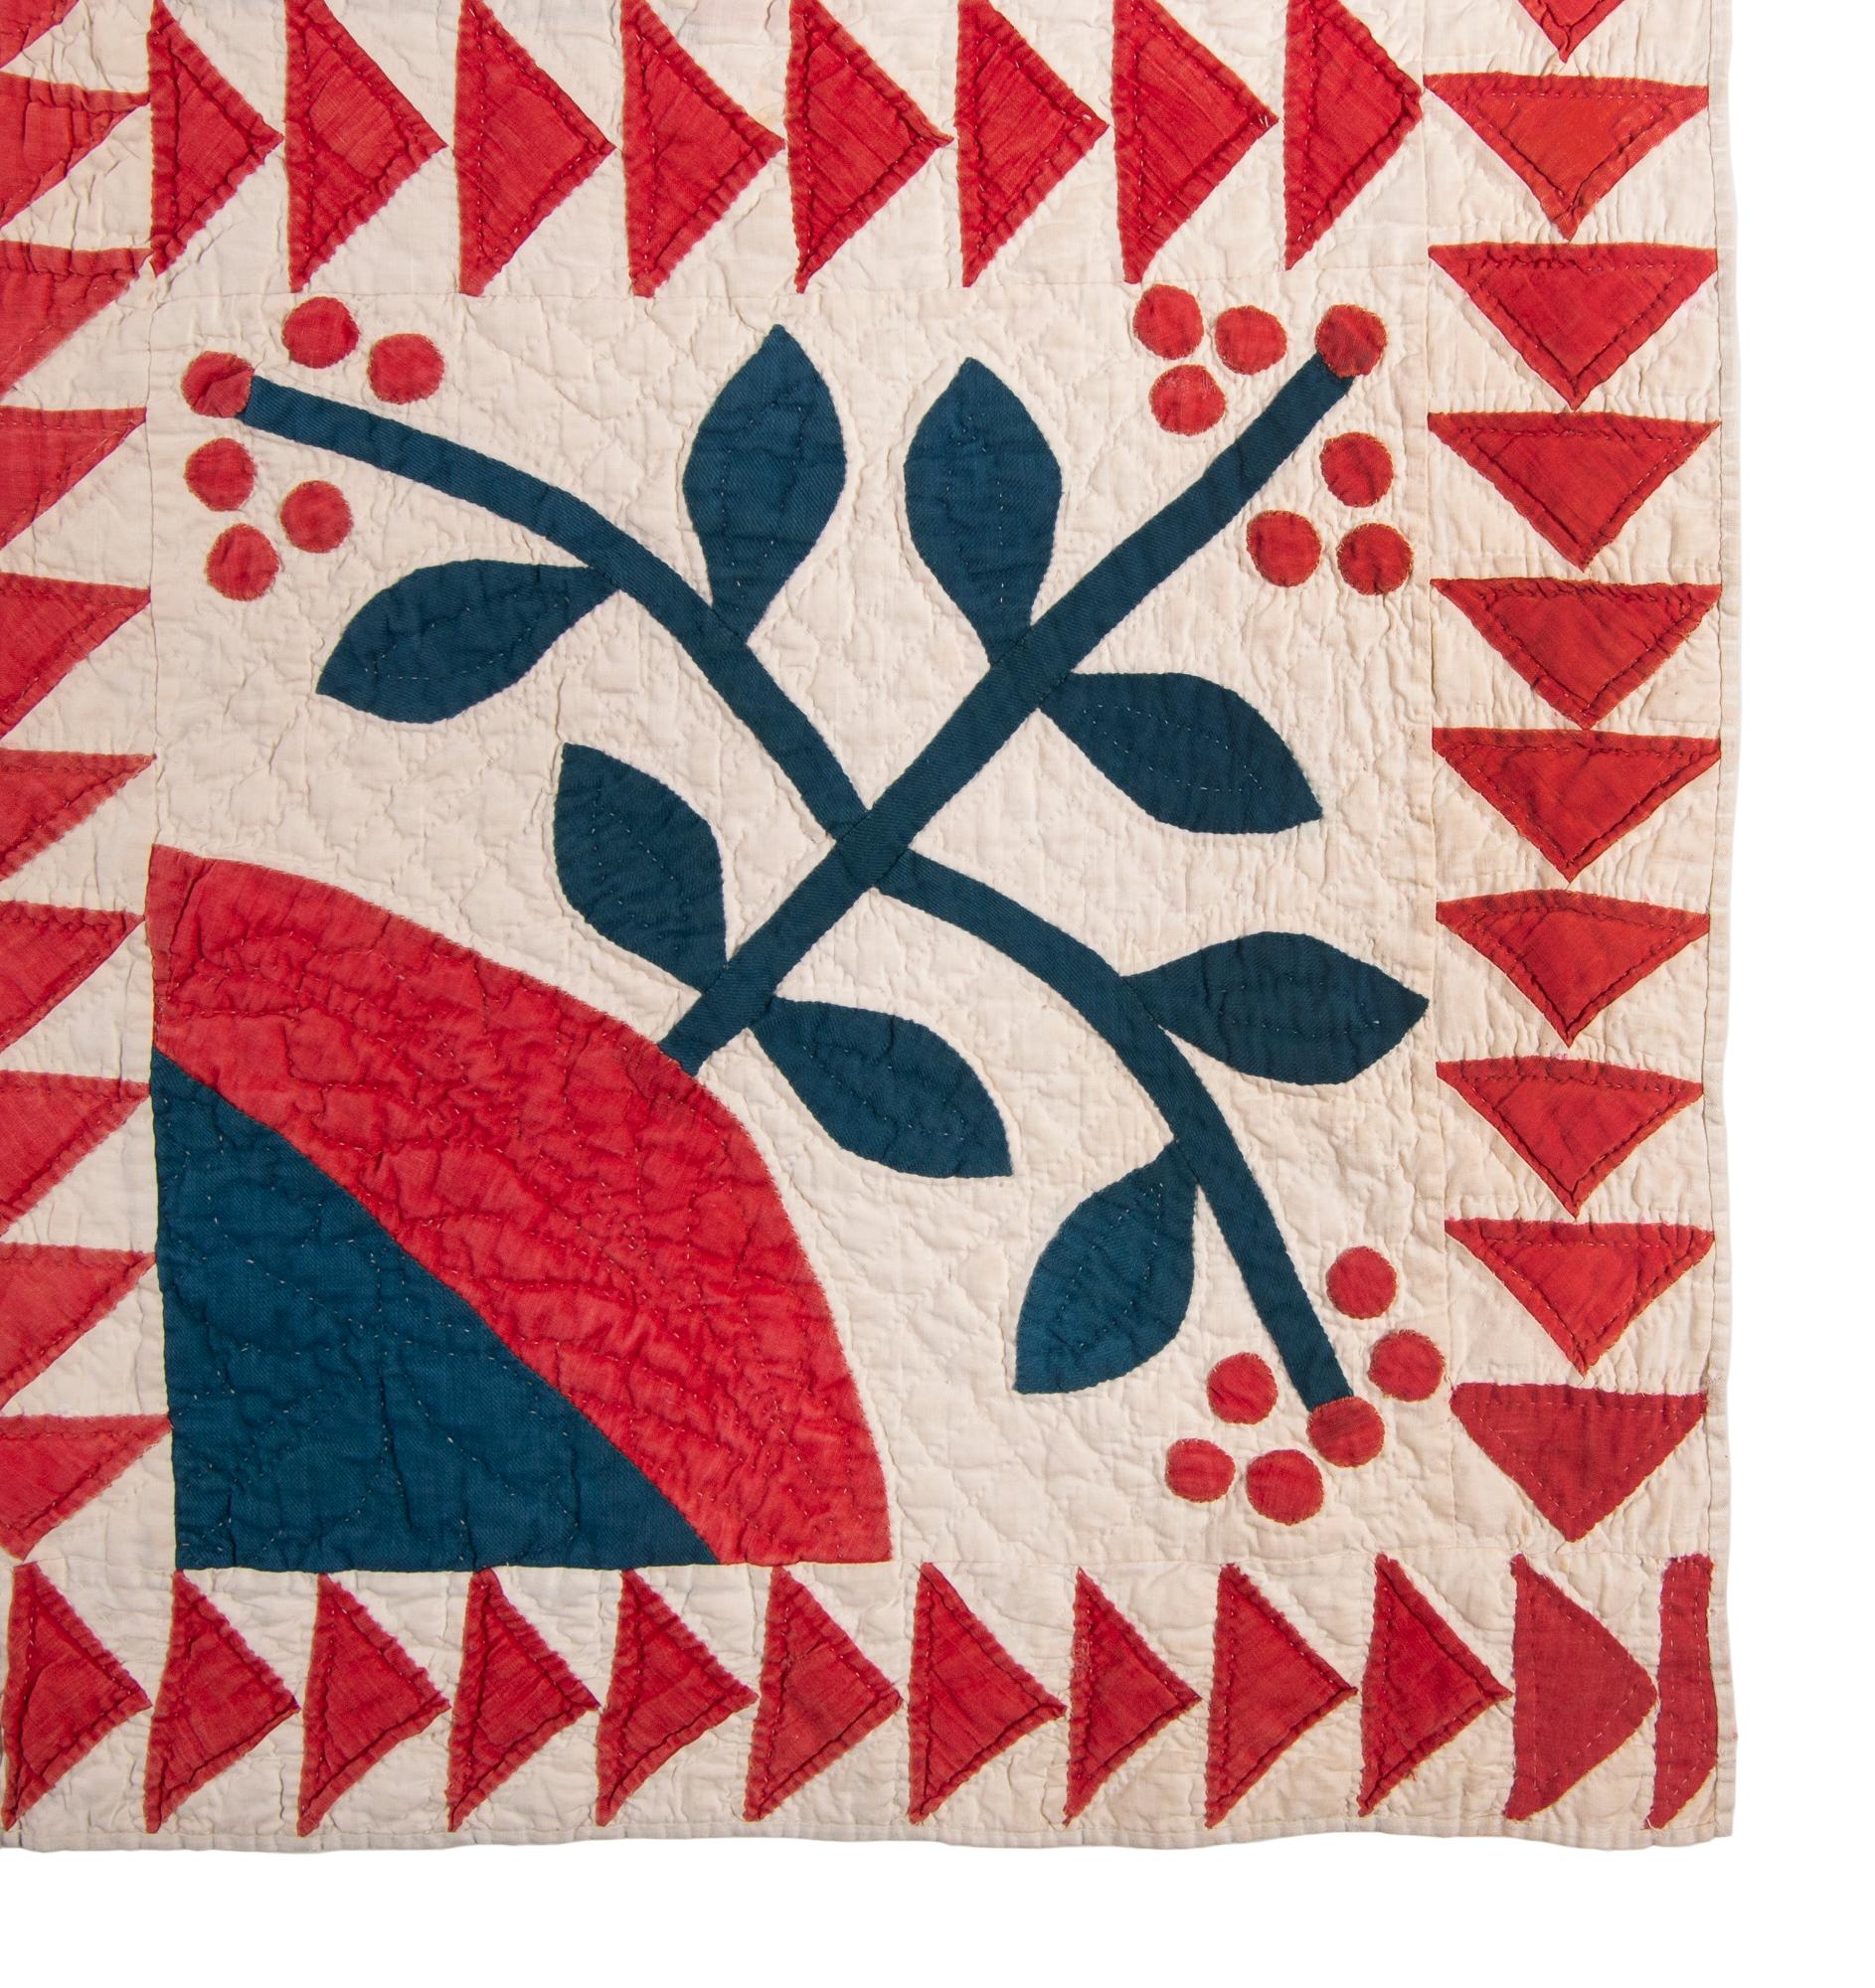 Winterberry pattern quilt with flying geese, in patriotic colors and with exceptional graphic impact, entirely hand-pieced and hand-quilted, circa 1860s-1870s

Made approximately between the Civil War and the 1870s, this exceptional red-white, and